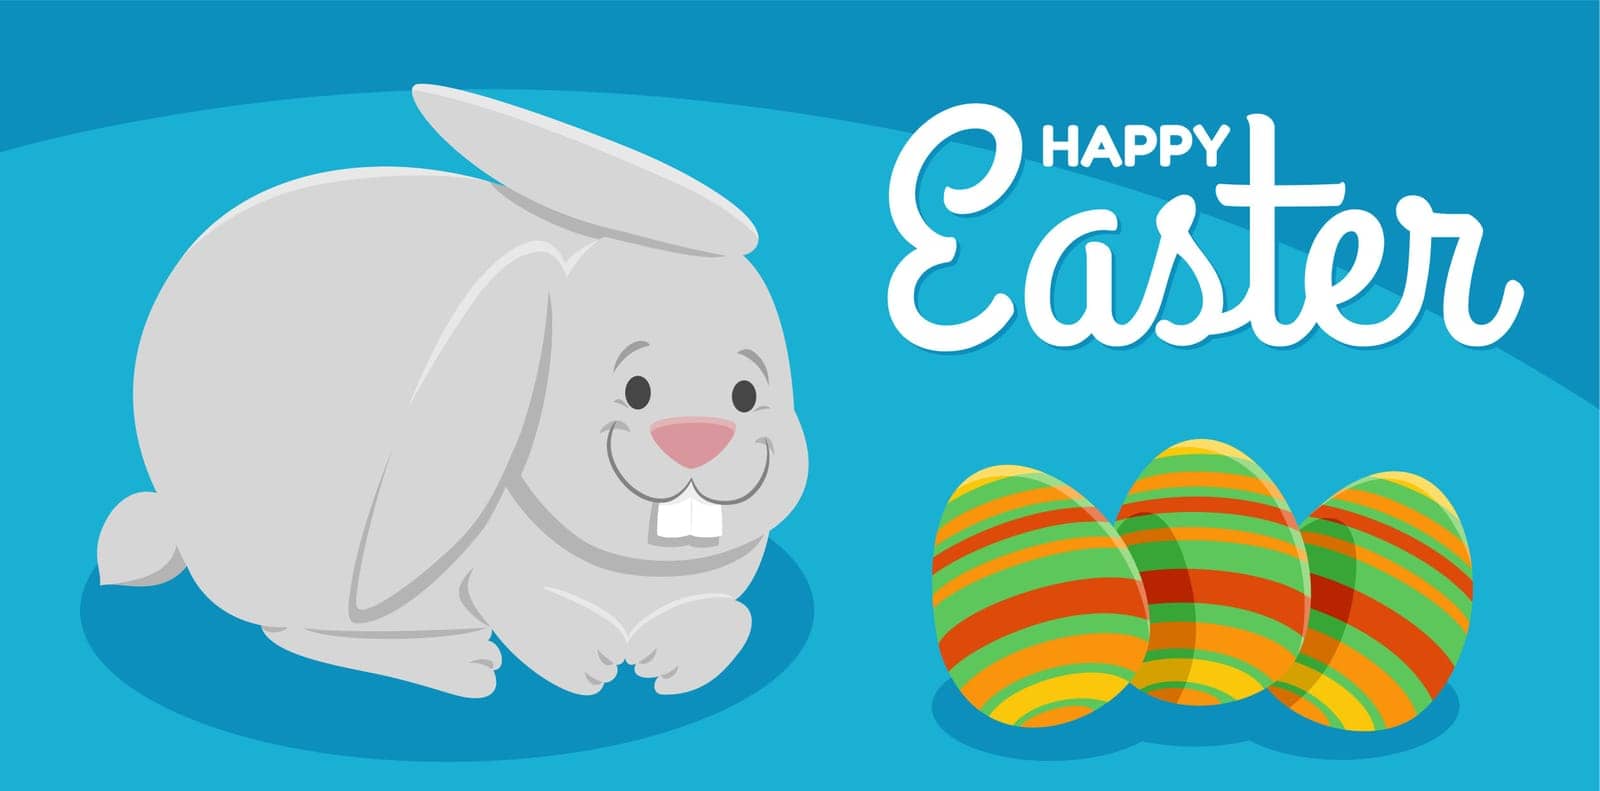 Cartoon illustration of happy Easter Bunny with Easter eggs character greeting card design